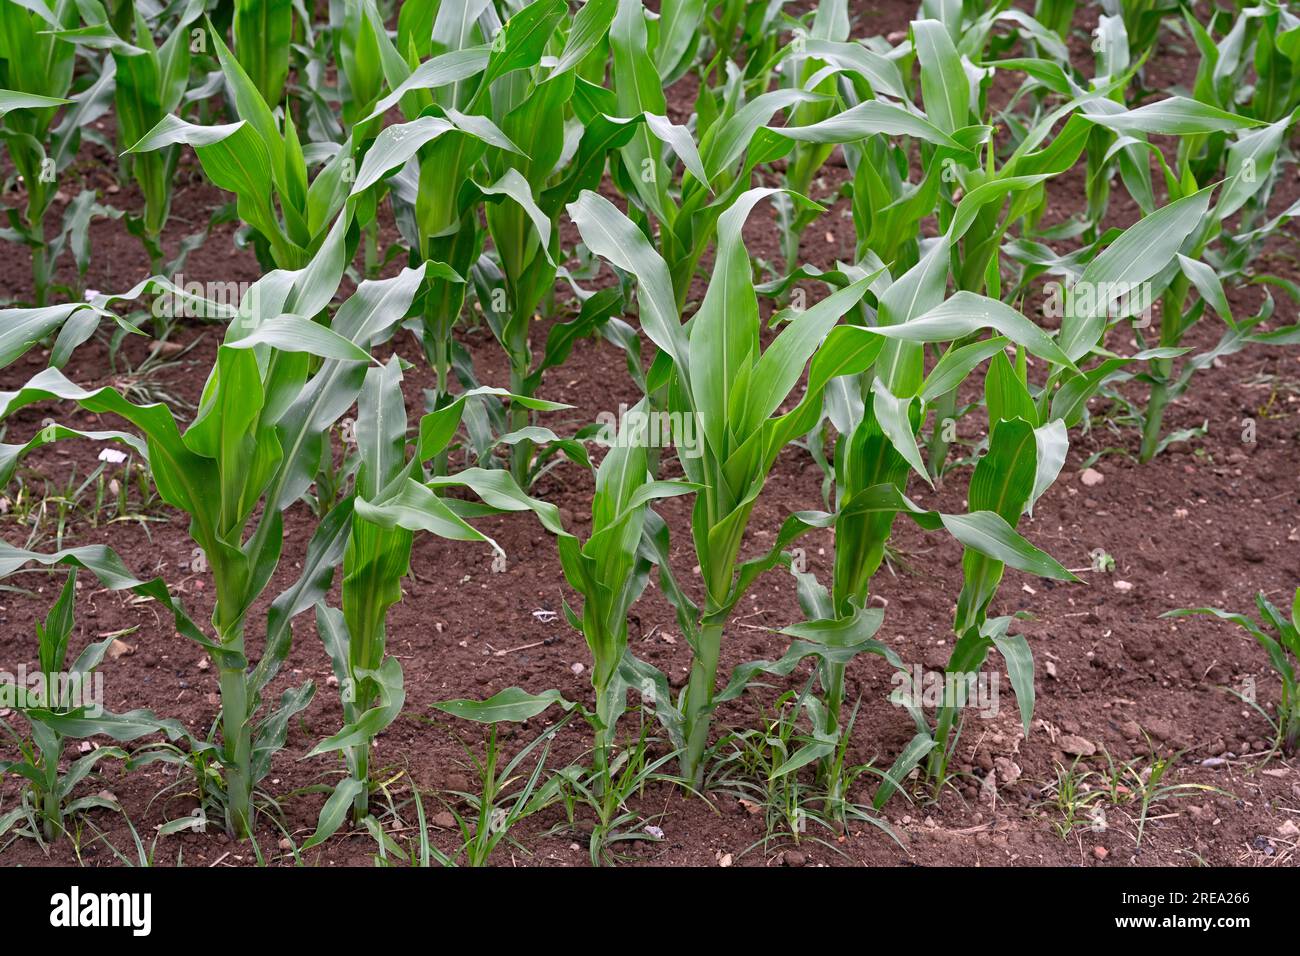 Young maize plants (Zea mays) growing in field Stock Photo